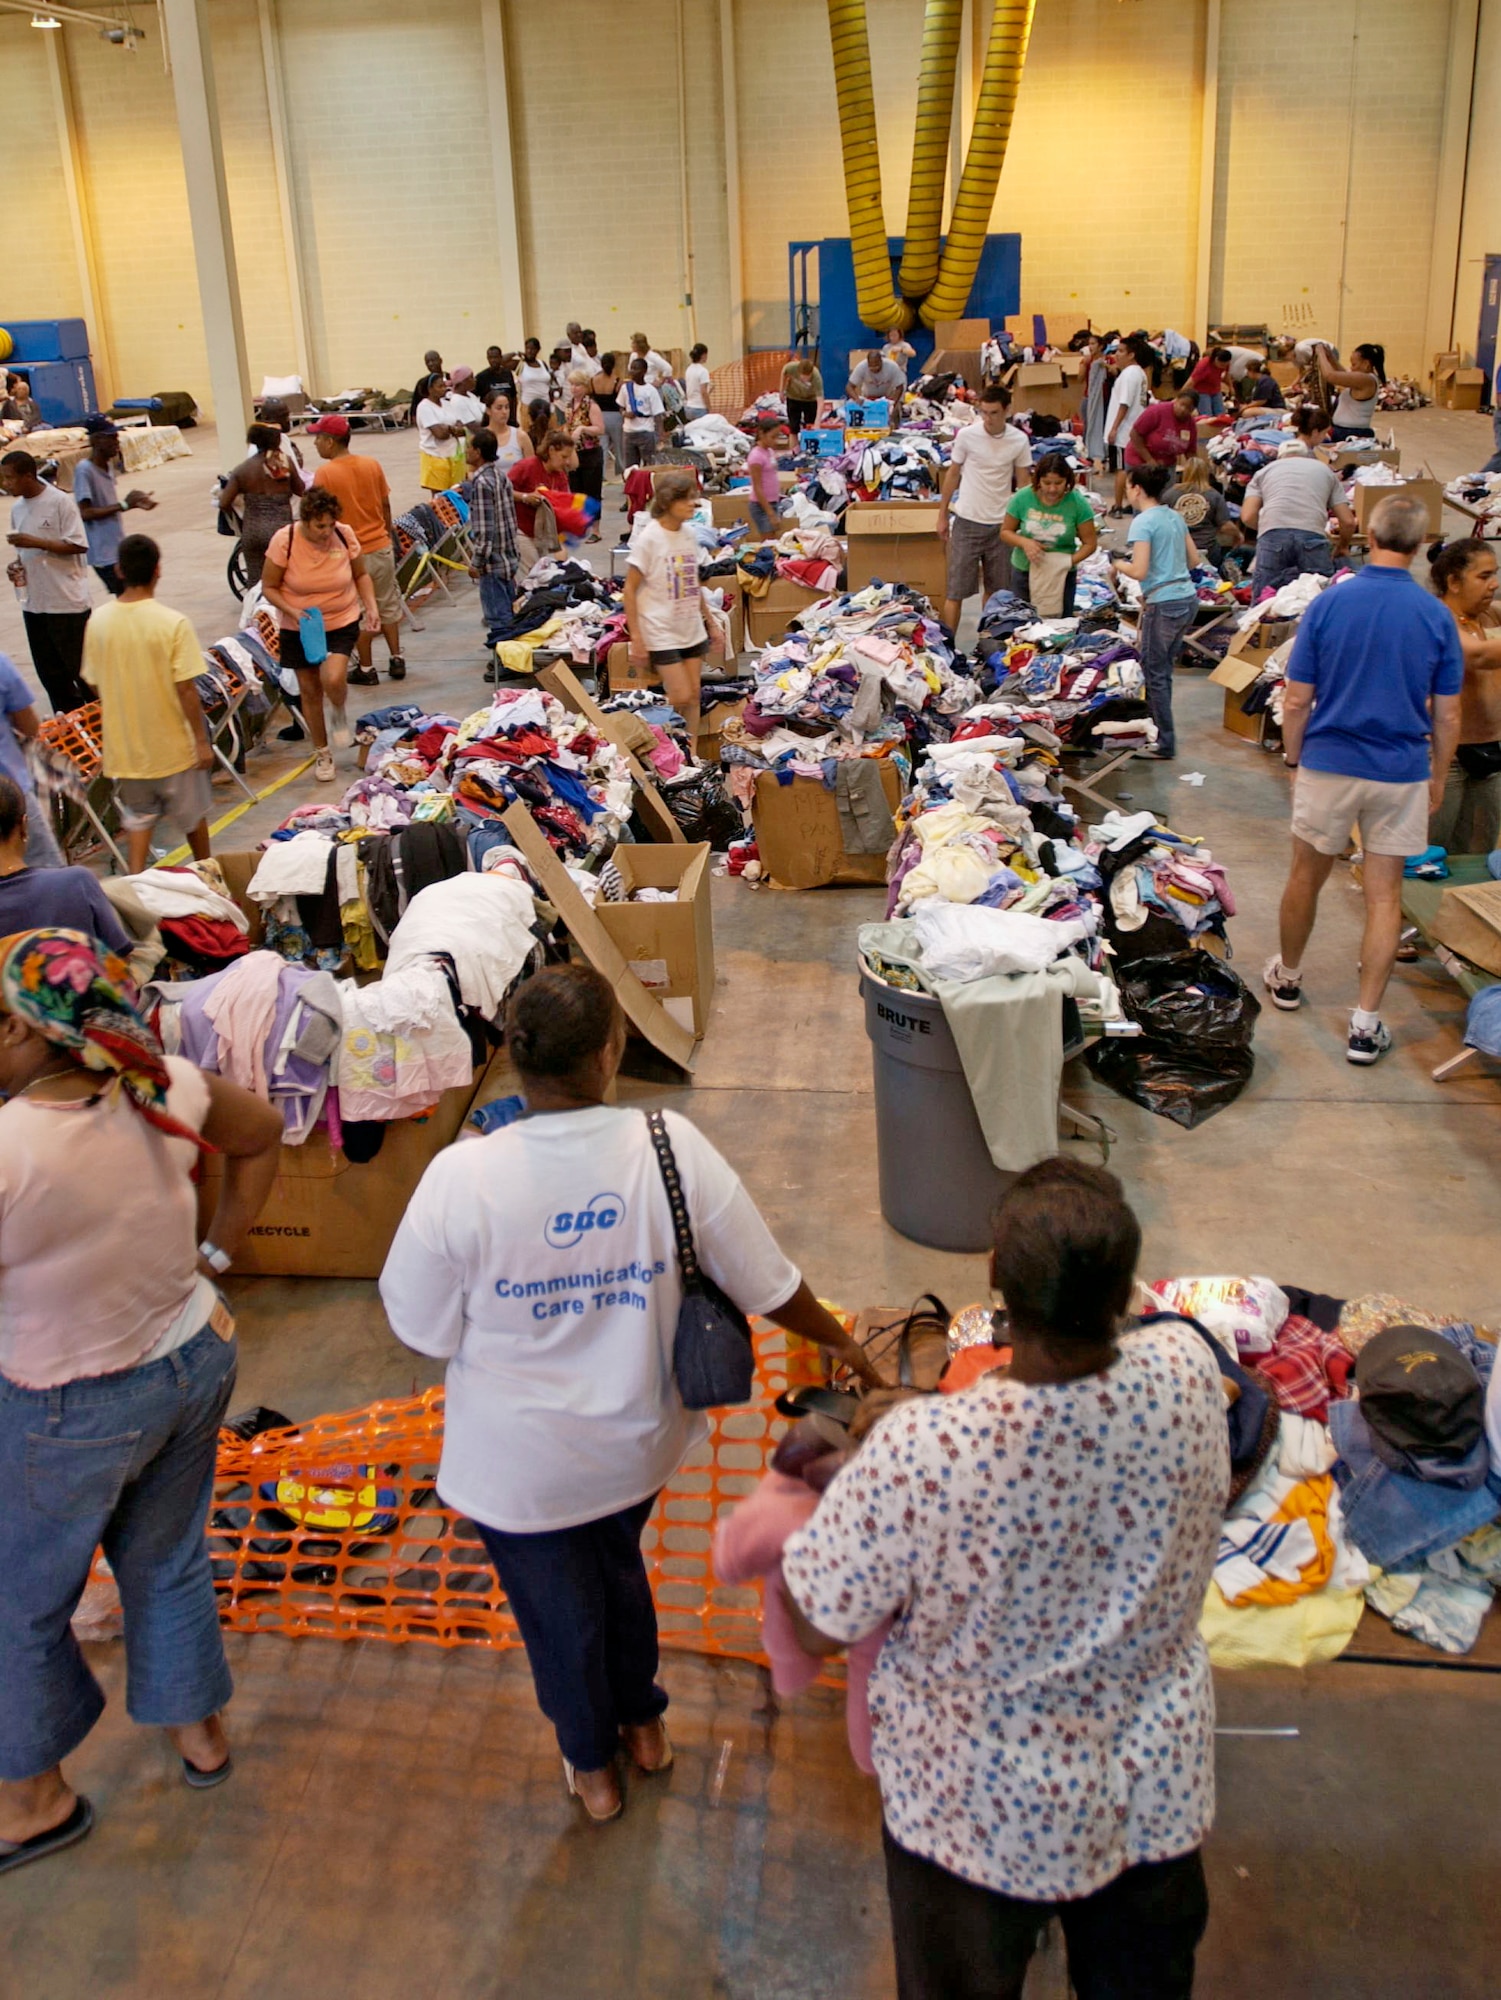 SAN ANTONIO - Gulf Coast evacuees sort through donated items here.  The evacuees were inprocessed, given a medical checkup, fed and provided donated clothing and other personal needs. (U.S. Air Force photo by Tech. Sgt. Mark Borosch)